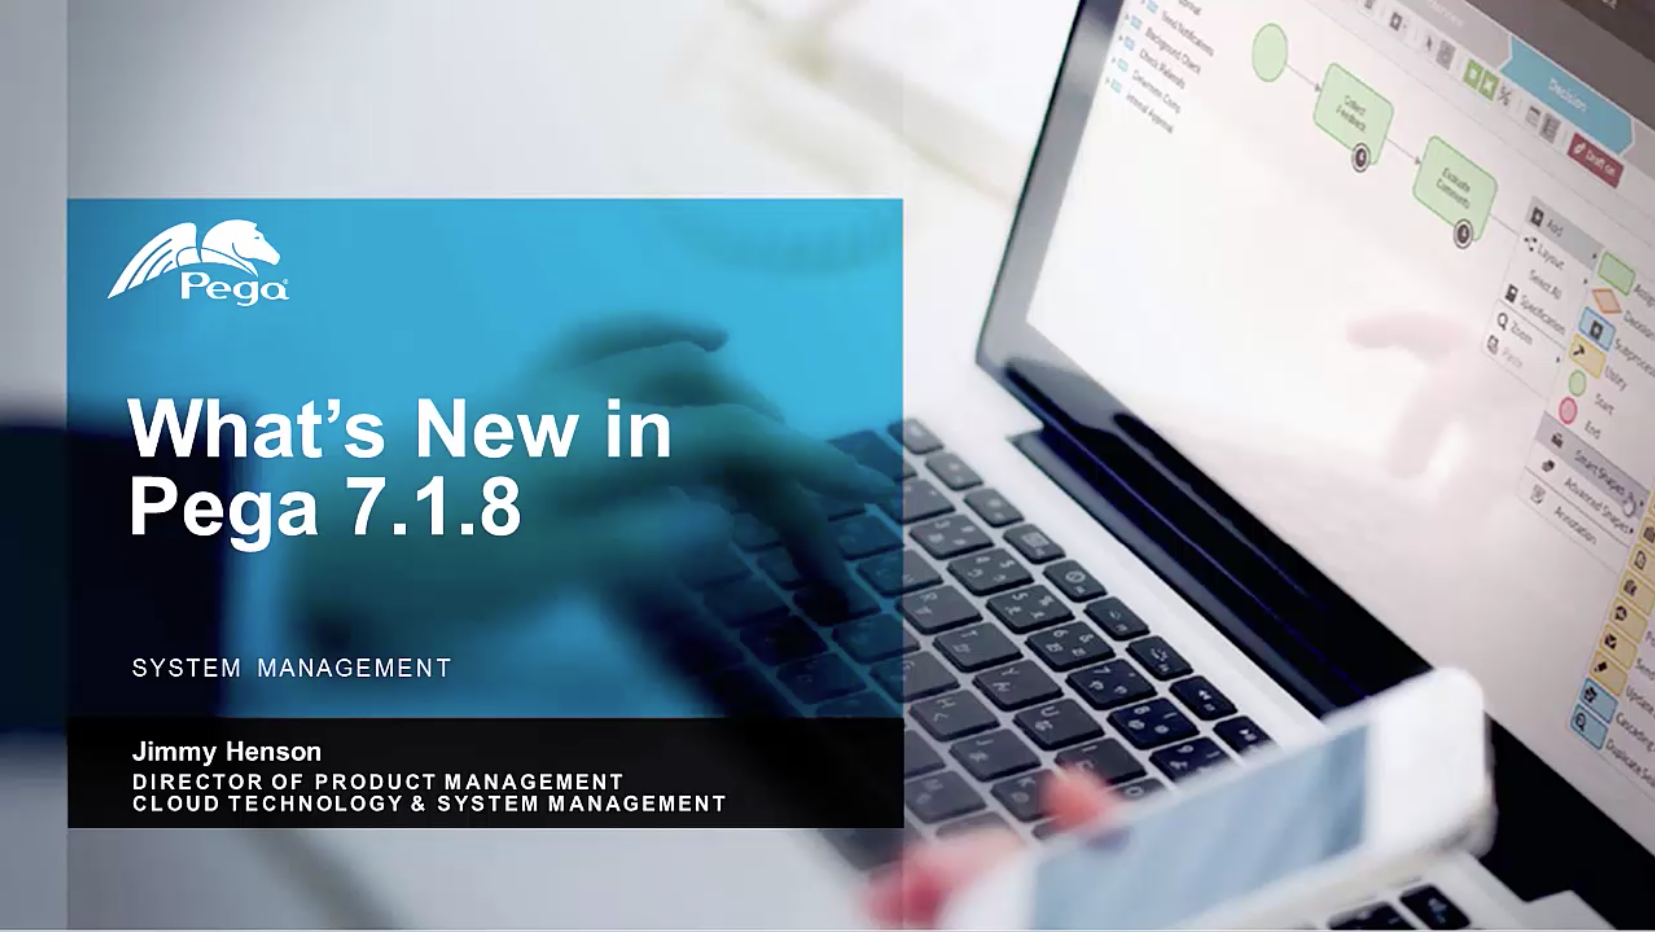 Pega 7.1.8 Update: What's New in System Management